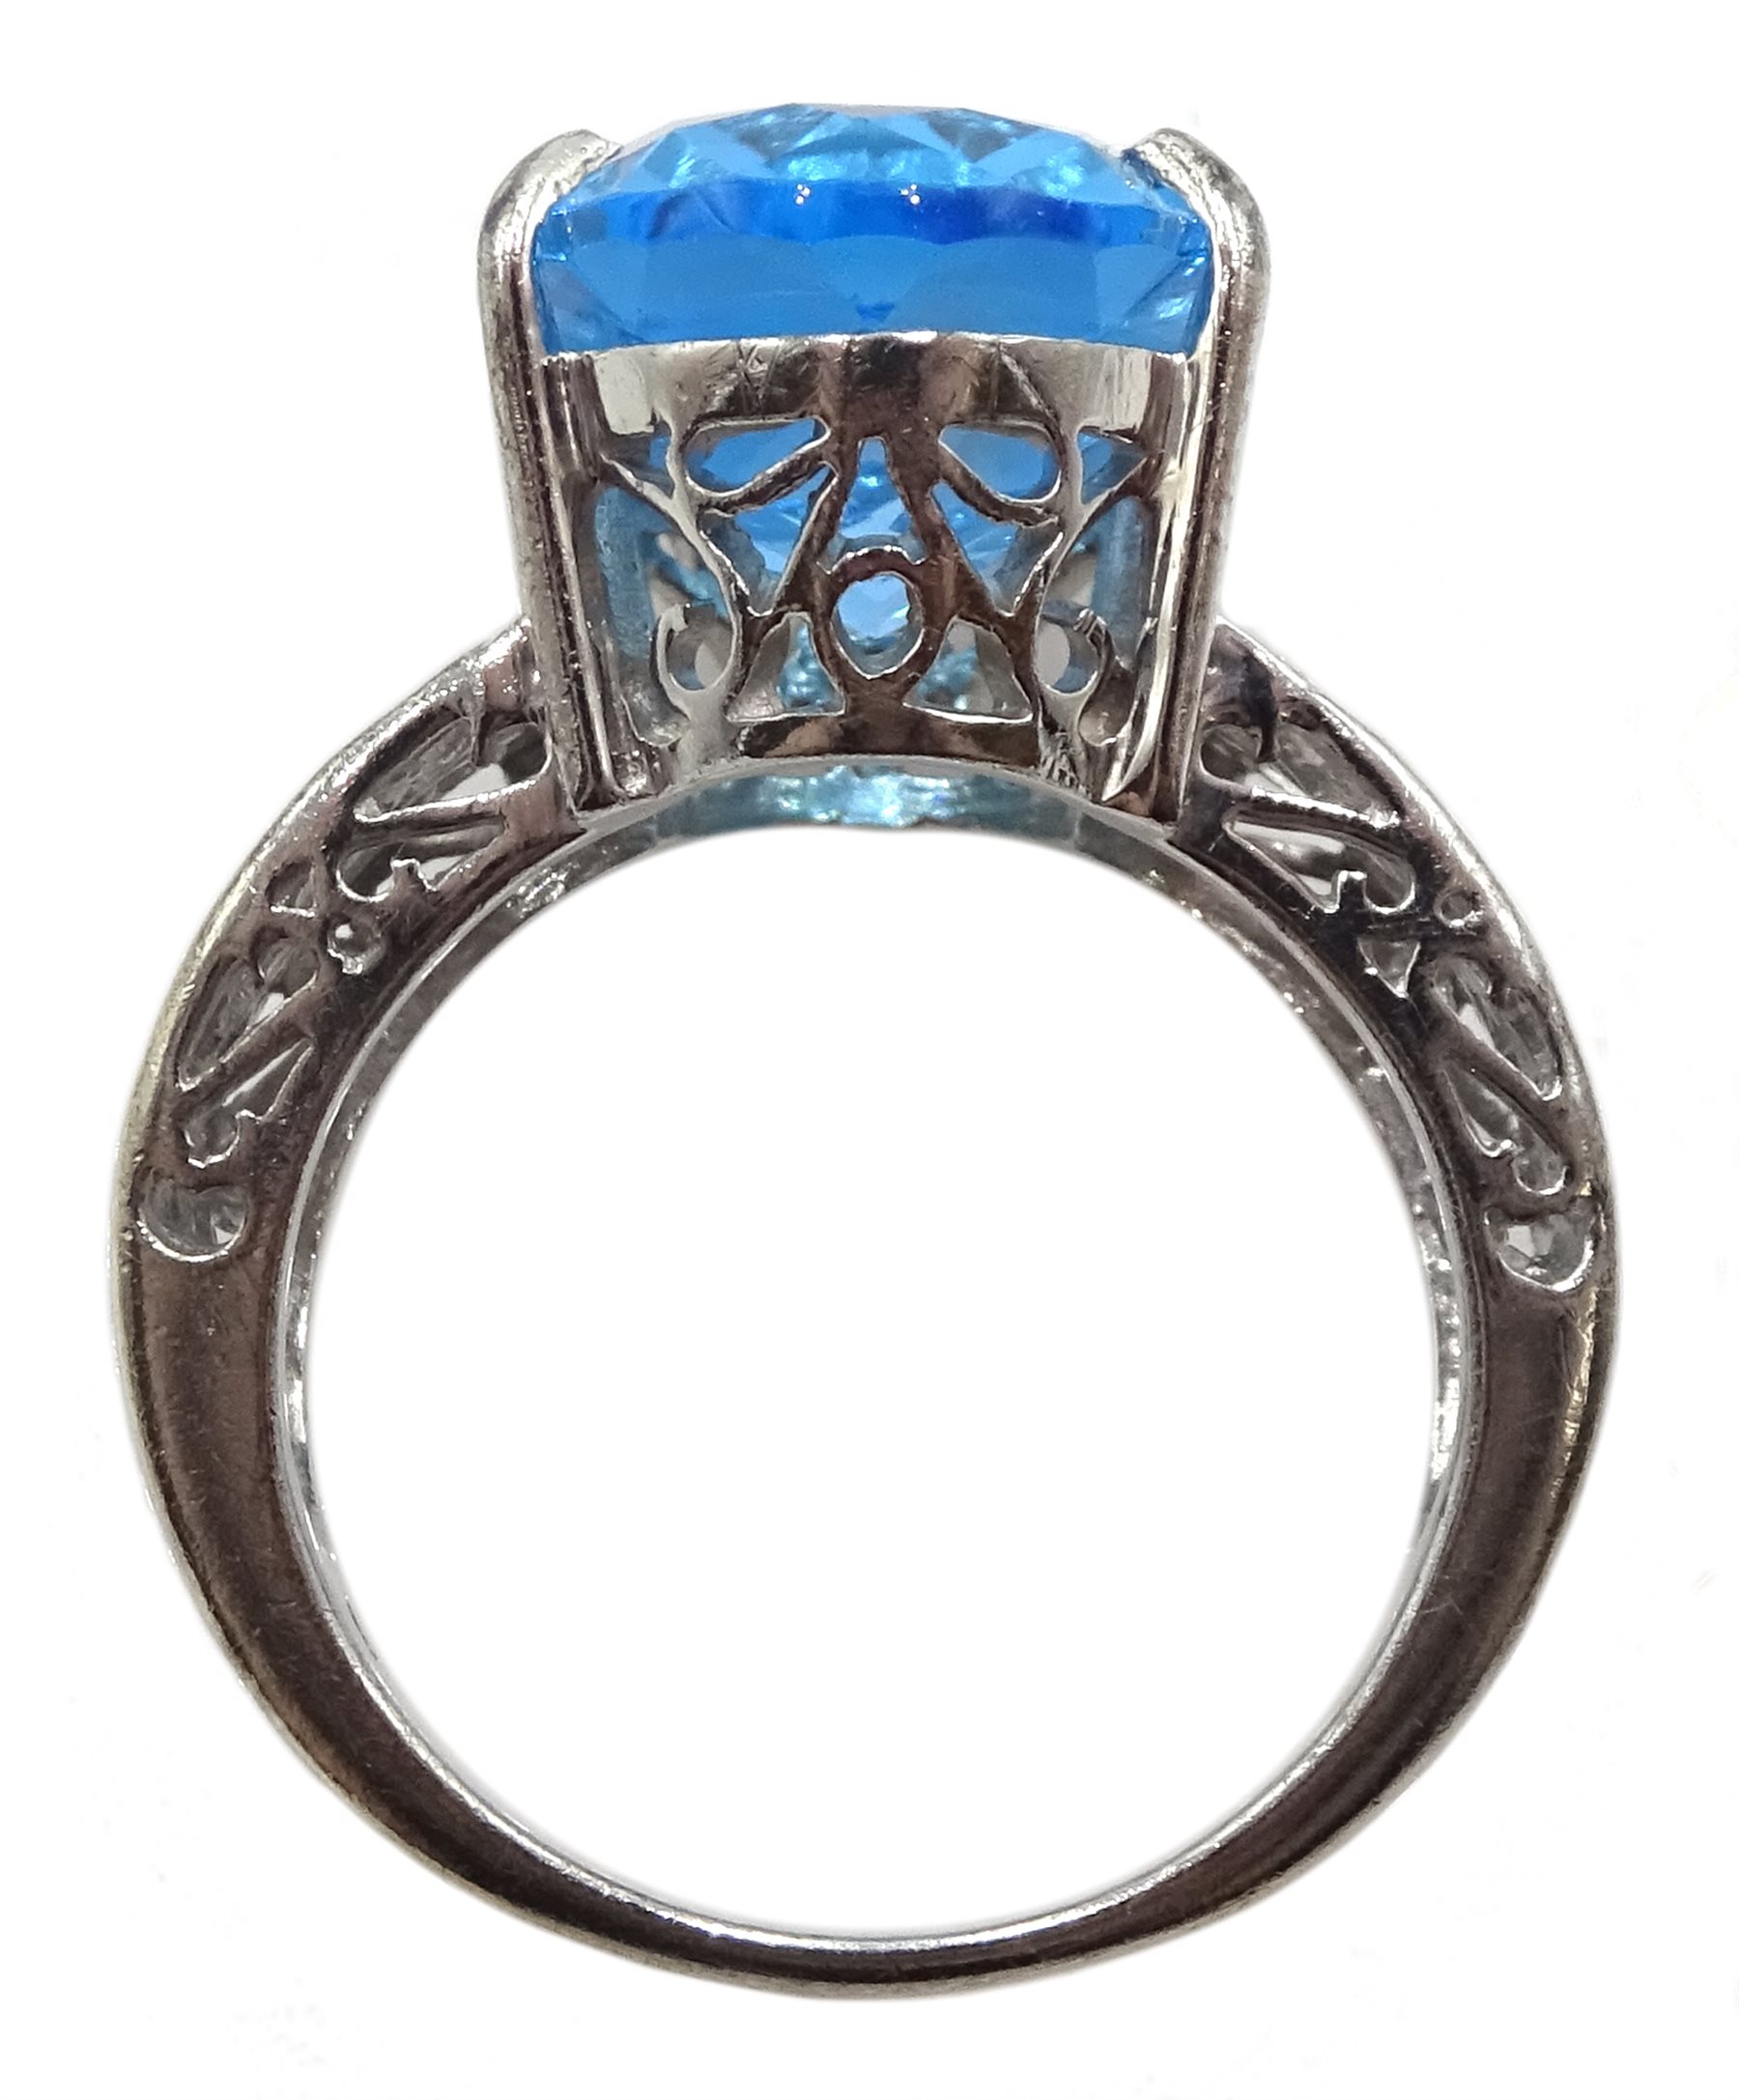 9ct white gold oval Swiss blue topaz ring, with openwork shank, stamped 375 [image code: 4mc] - Image 4 of 4